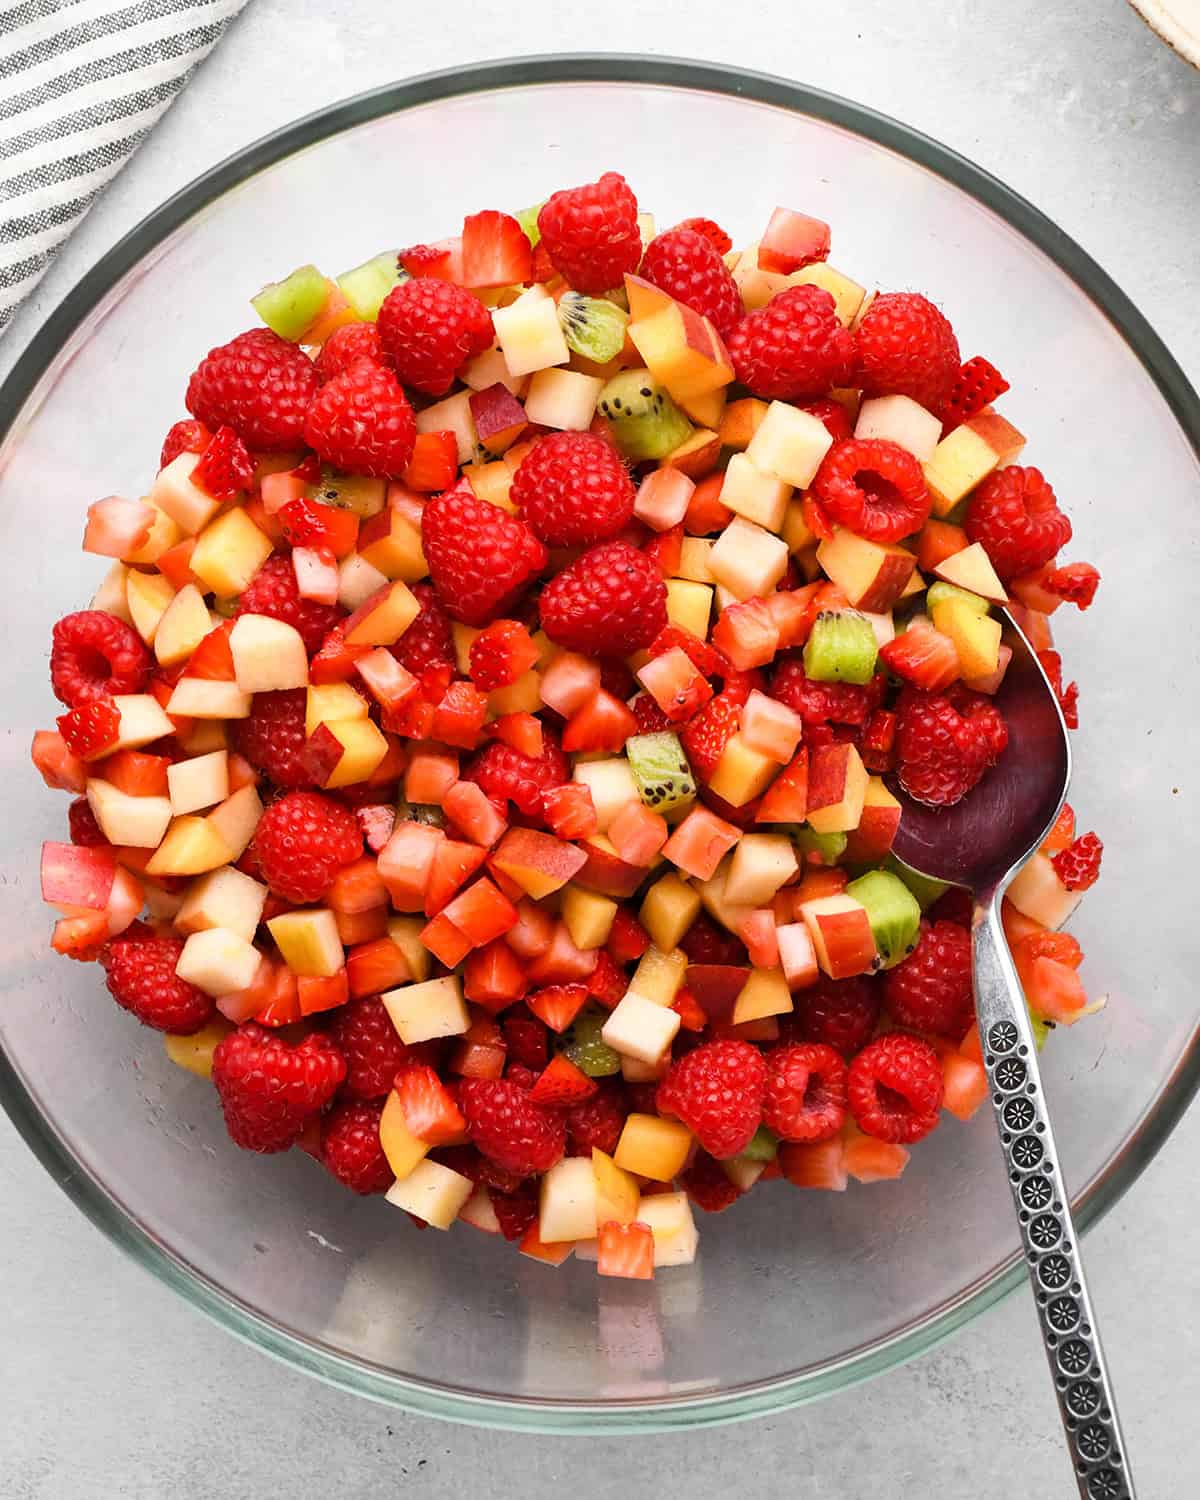 making Fruit Salsa Recipe - fruit in a bowl after mixing